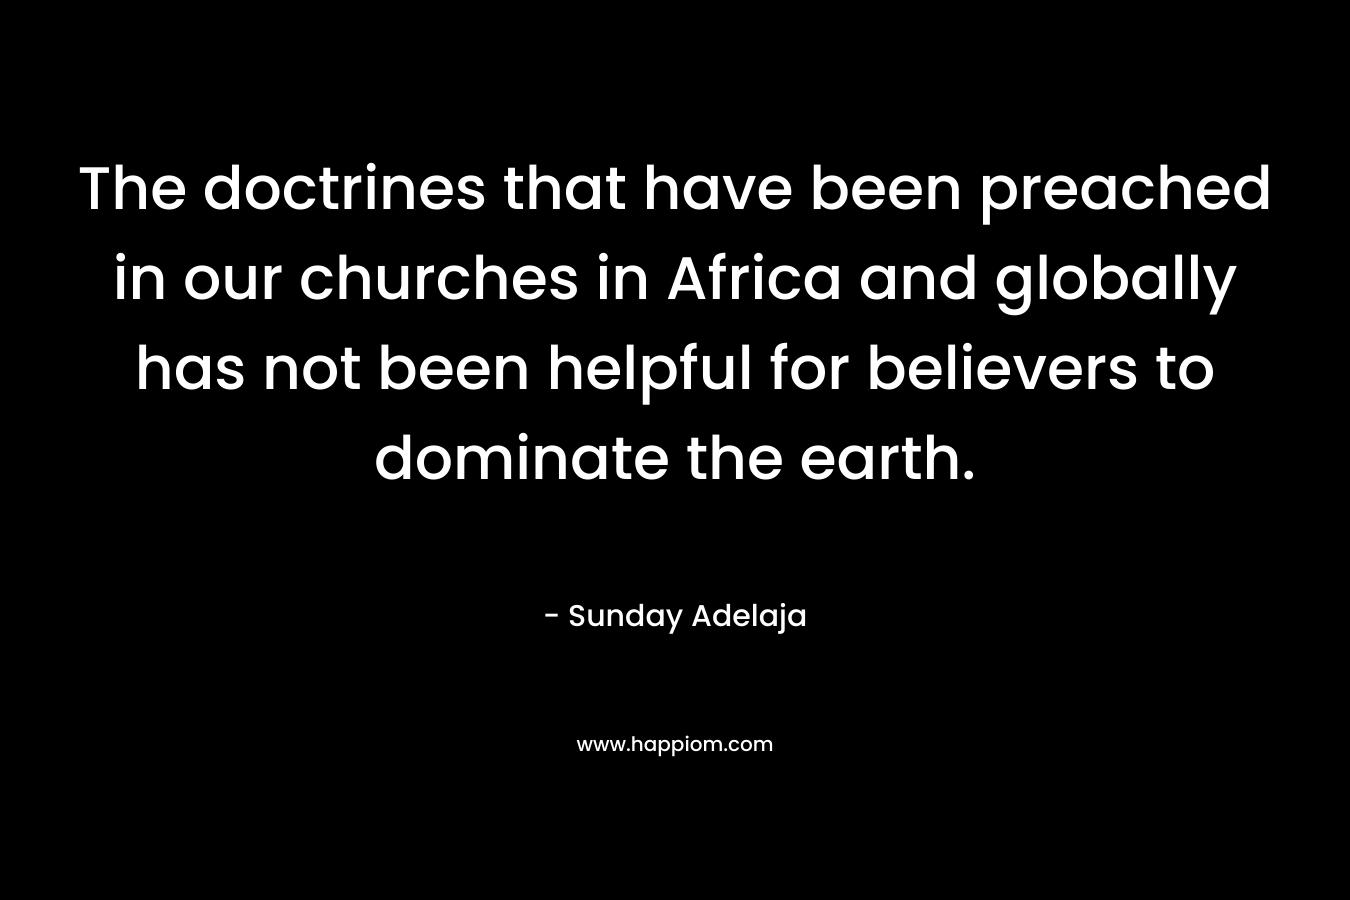 The doctrines that have been preached in our churches in Africa and globally has not been helpful for believers to dominate the earth. – Sunday Adelaja